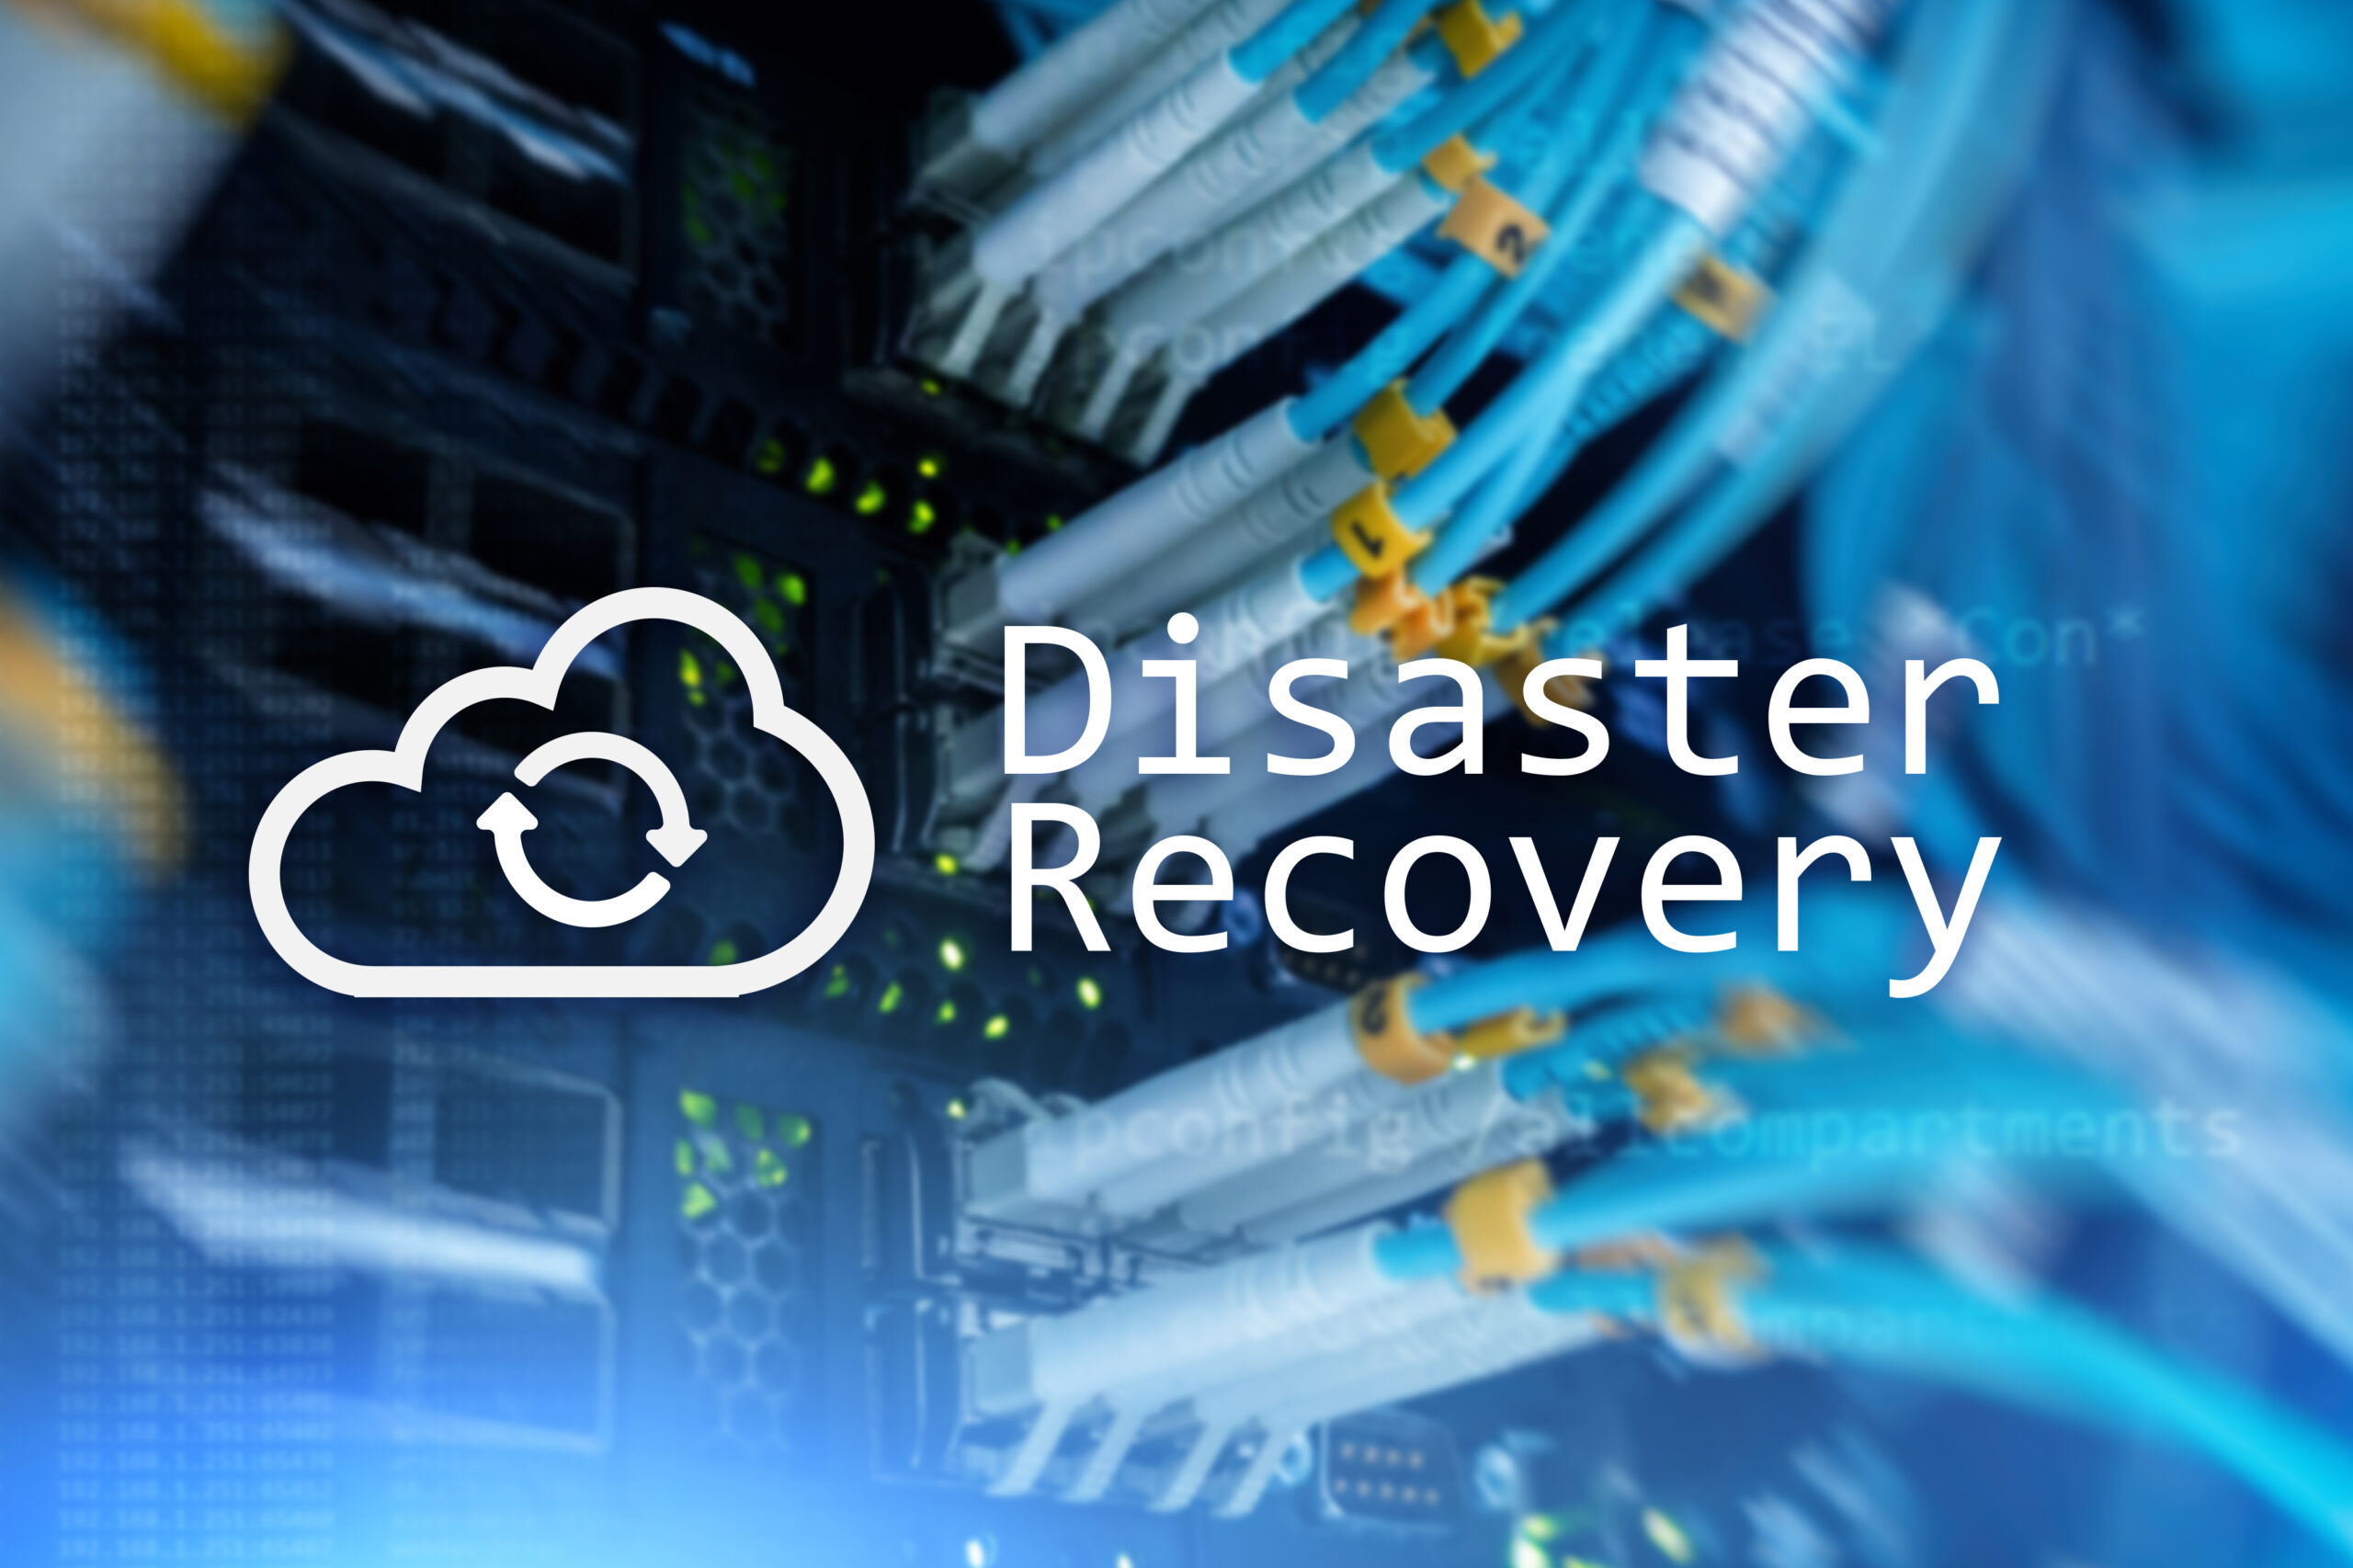 backup and disaster recovery plan